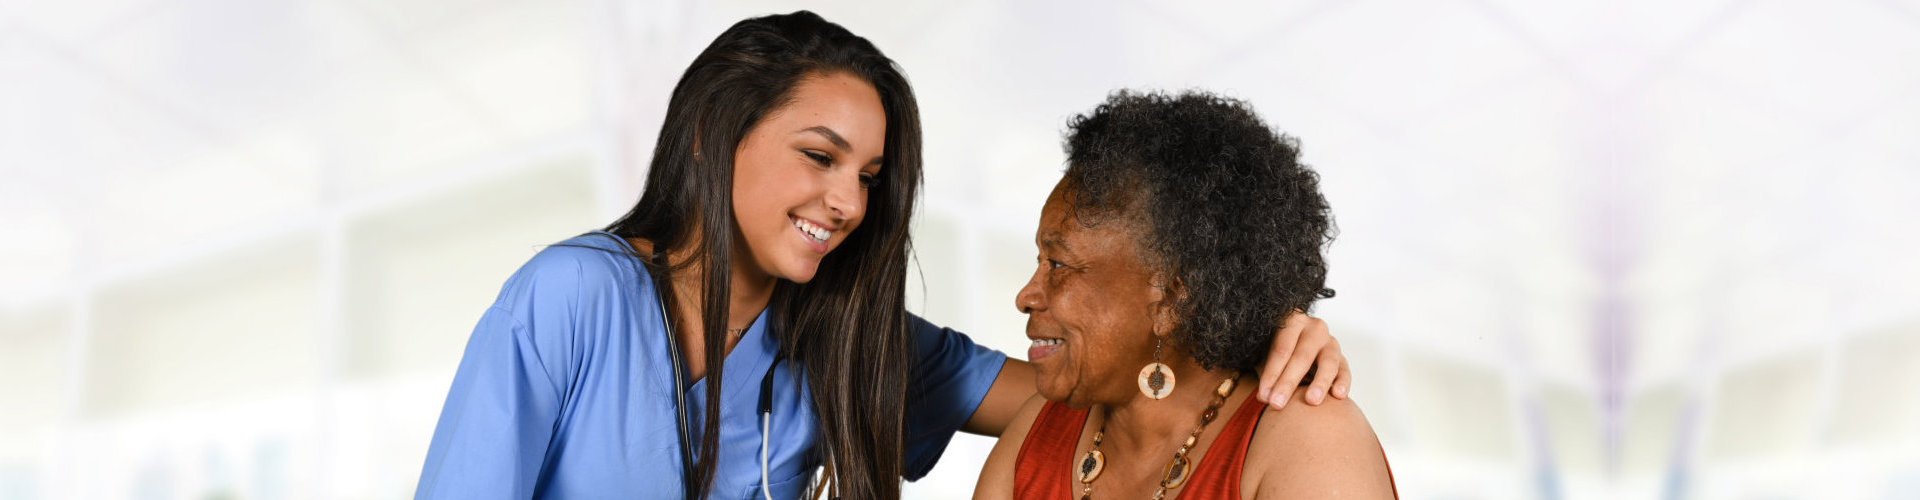 elder woman with caregiver looking at each other